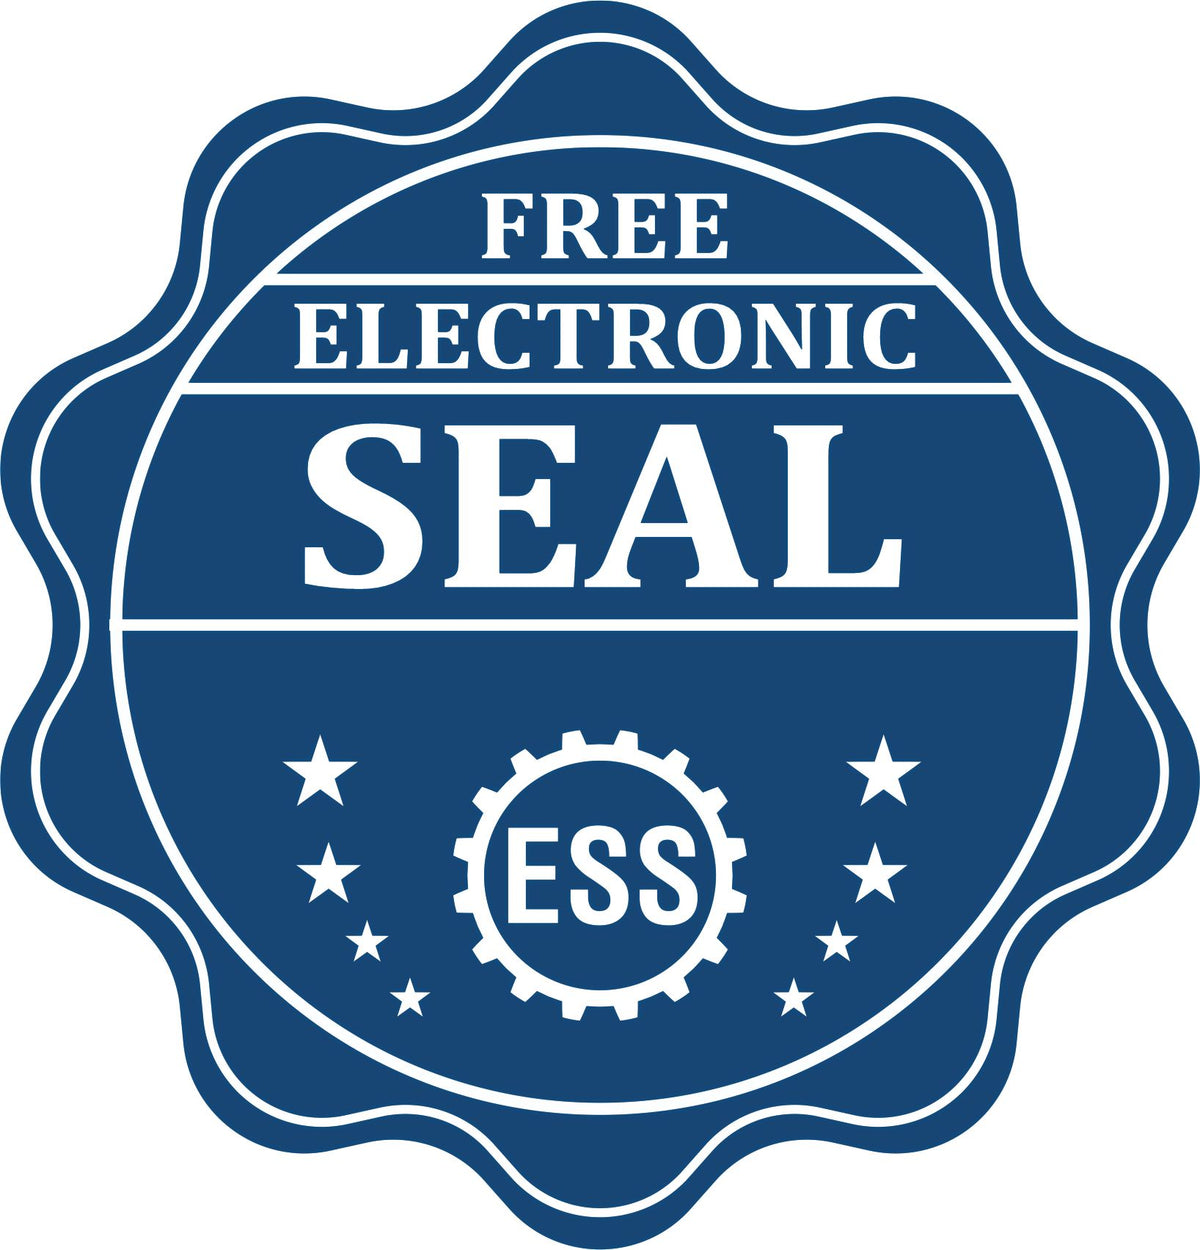 A badge showing a free electronic seal for the Slim Pre-Inked Wyoming Landscape Architect Seal Stamp with stars and the ESS gear on the emblem.